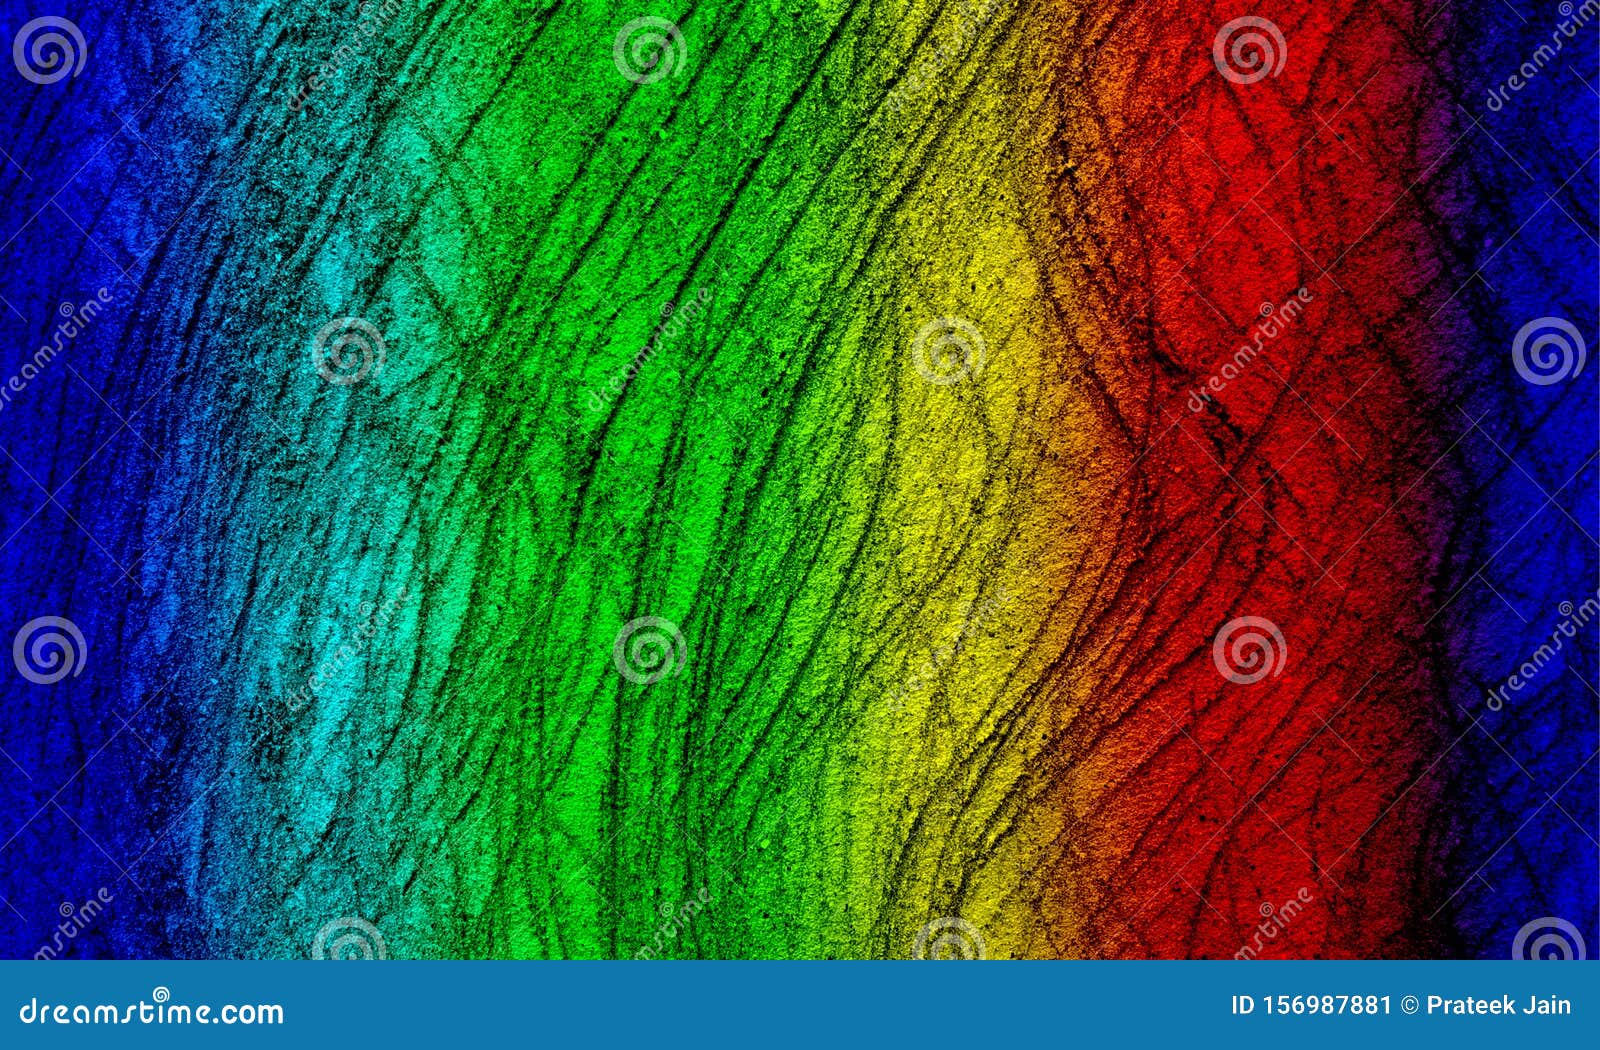 Texture Grunge. Colourful Dark Abstract Grunge Rusty Distorted Decay Old  Texture Background Wallpaper. Stock Image - Image of backdrop, backgrounds:  156987881